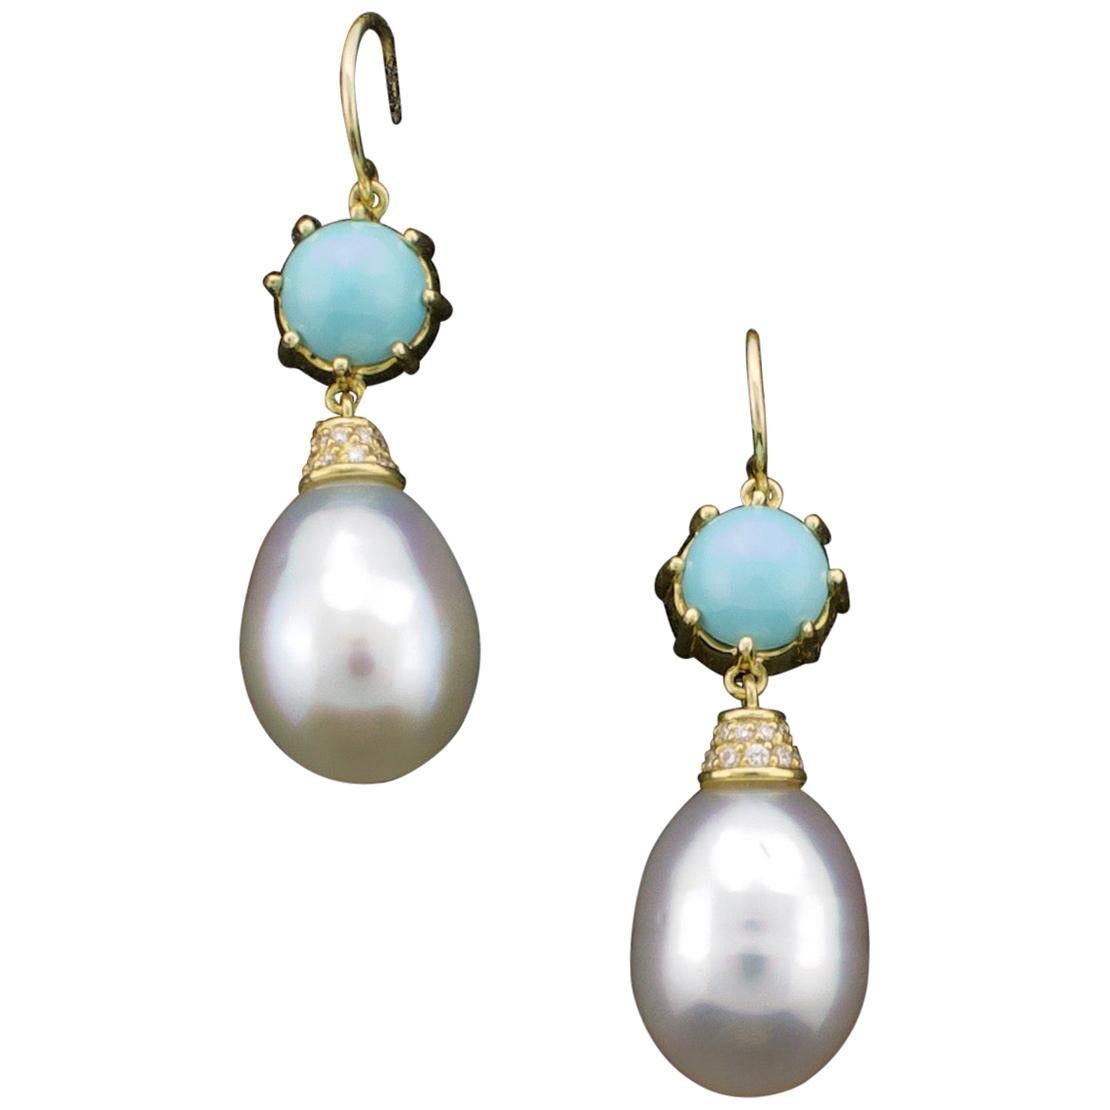 Lovely Dangling South Sea Pearl and Turquoise Earrings in 18 Karat Yellow Gold